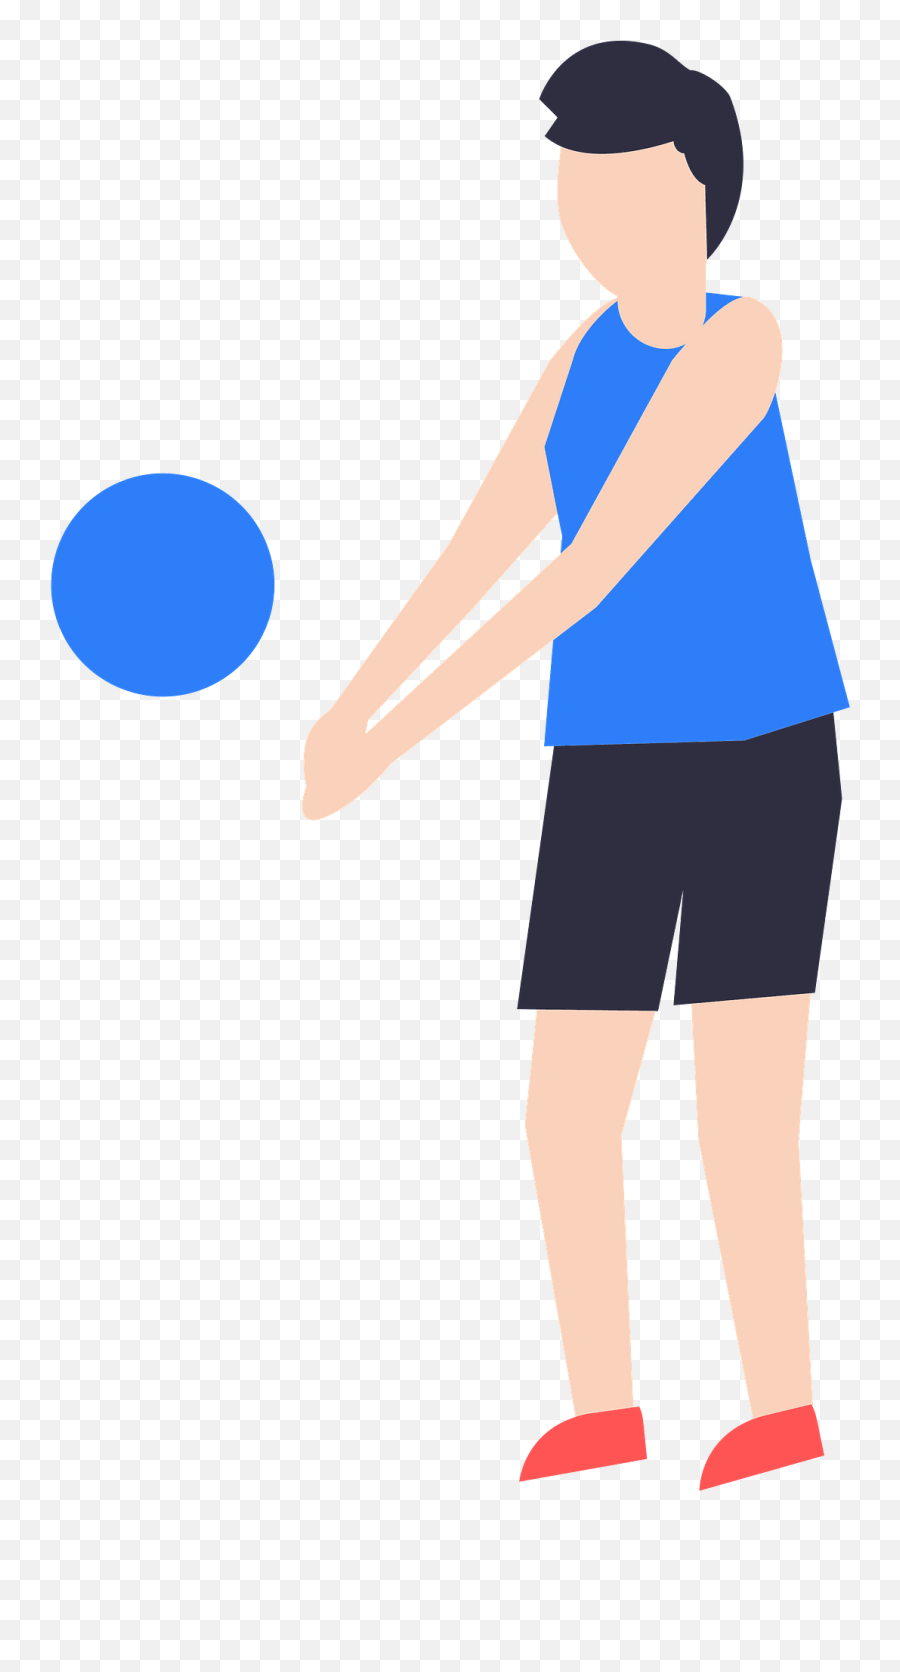 Volleyball Clipart Free Download Transparent Png Creazilla - For Volleyball Emoji,Volleyball Clipart